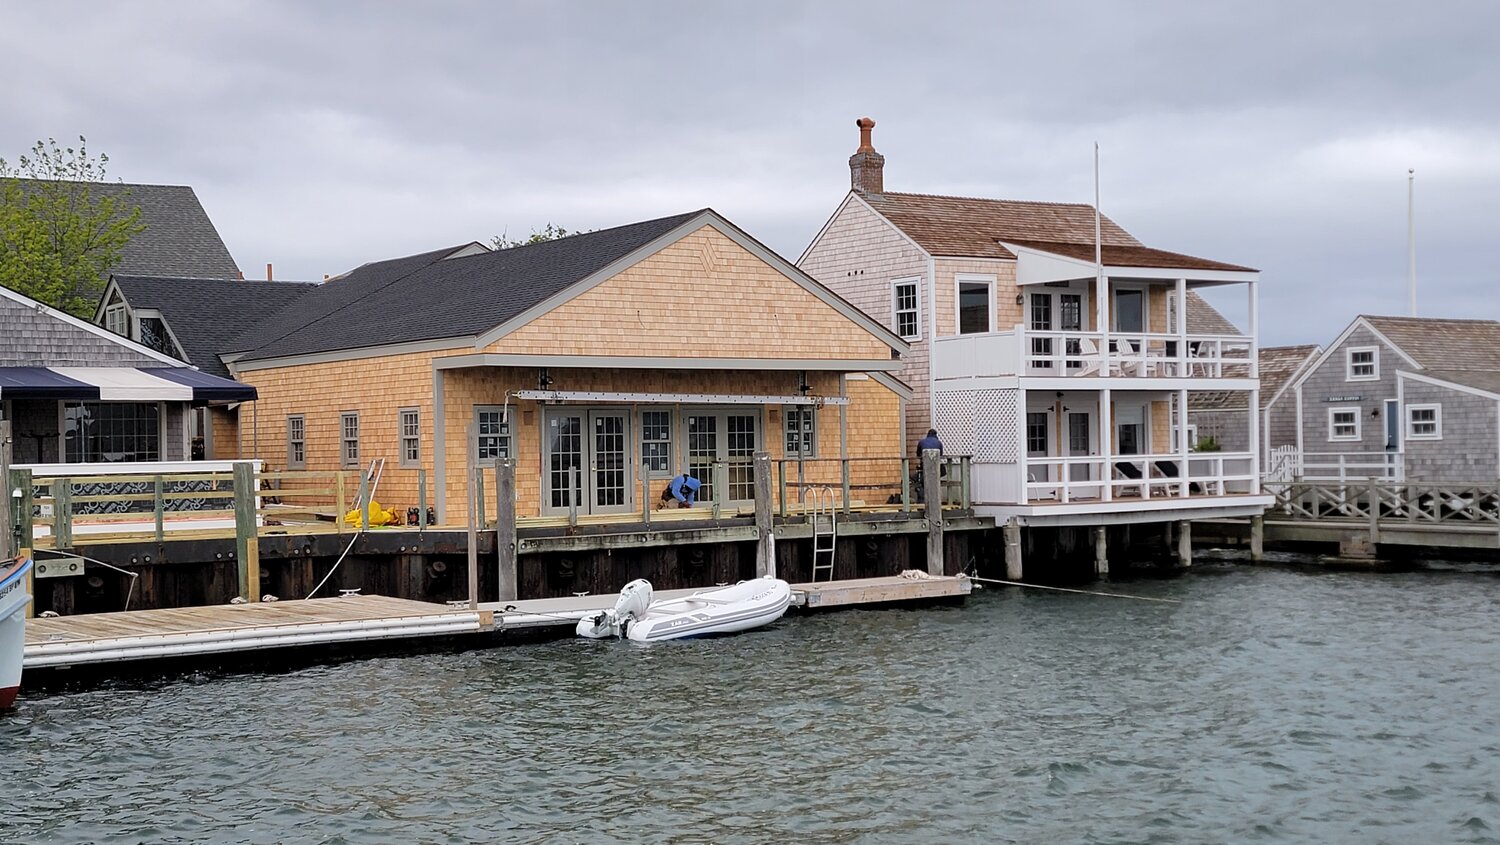 Gabriel Frasca and Kevin Burleson hope to open the Straight Wharf Fish Market restaurant in the space at left by mid-summer. The cottage of Charles Johnson, who has filed suit against the project, is at right.